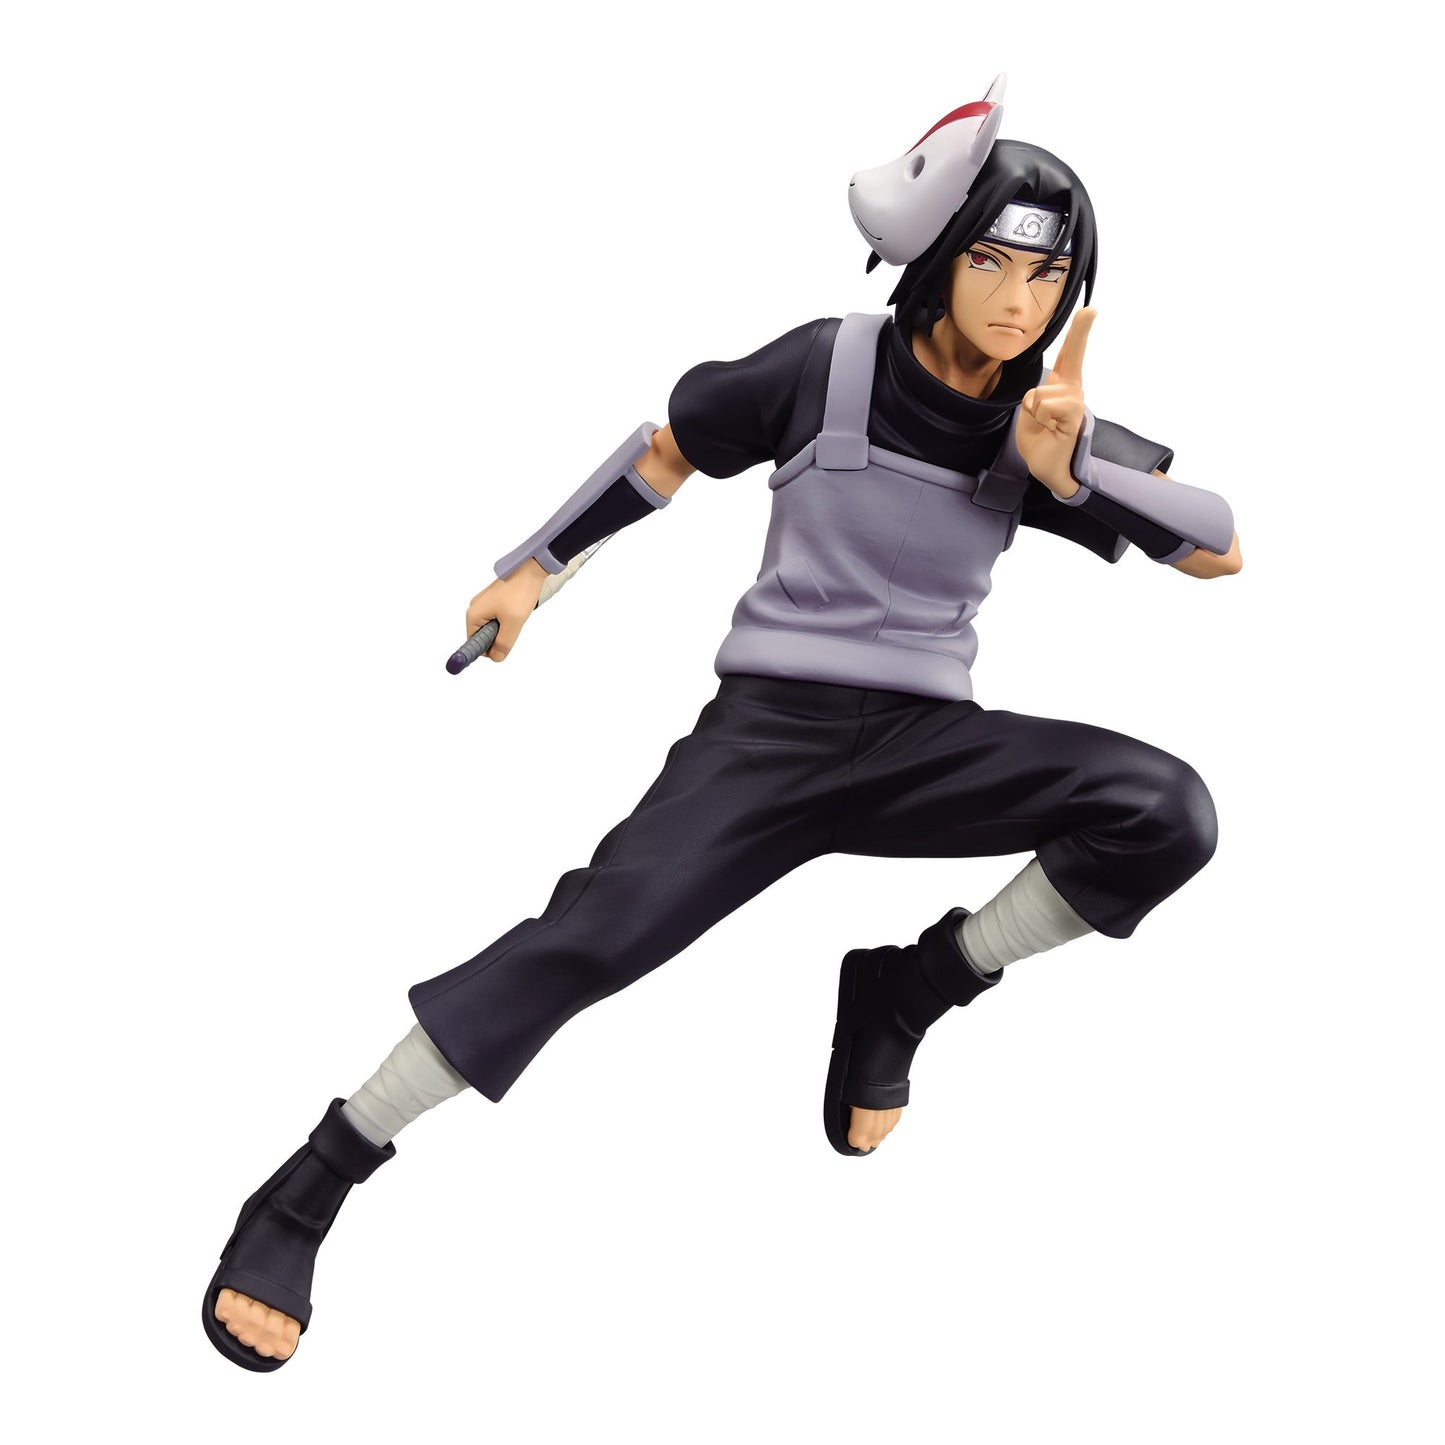 OFFO Naruto Anime Itachi Uchiha Action Figure [17 cm] for Home Decors,  Office Desk and Study Table - Naruto Anime Itachi Uchiha Action Figure [17  cm] for Home Decors, Office Desk and